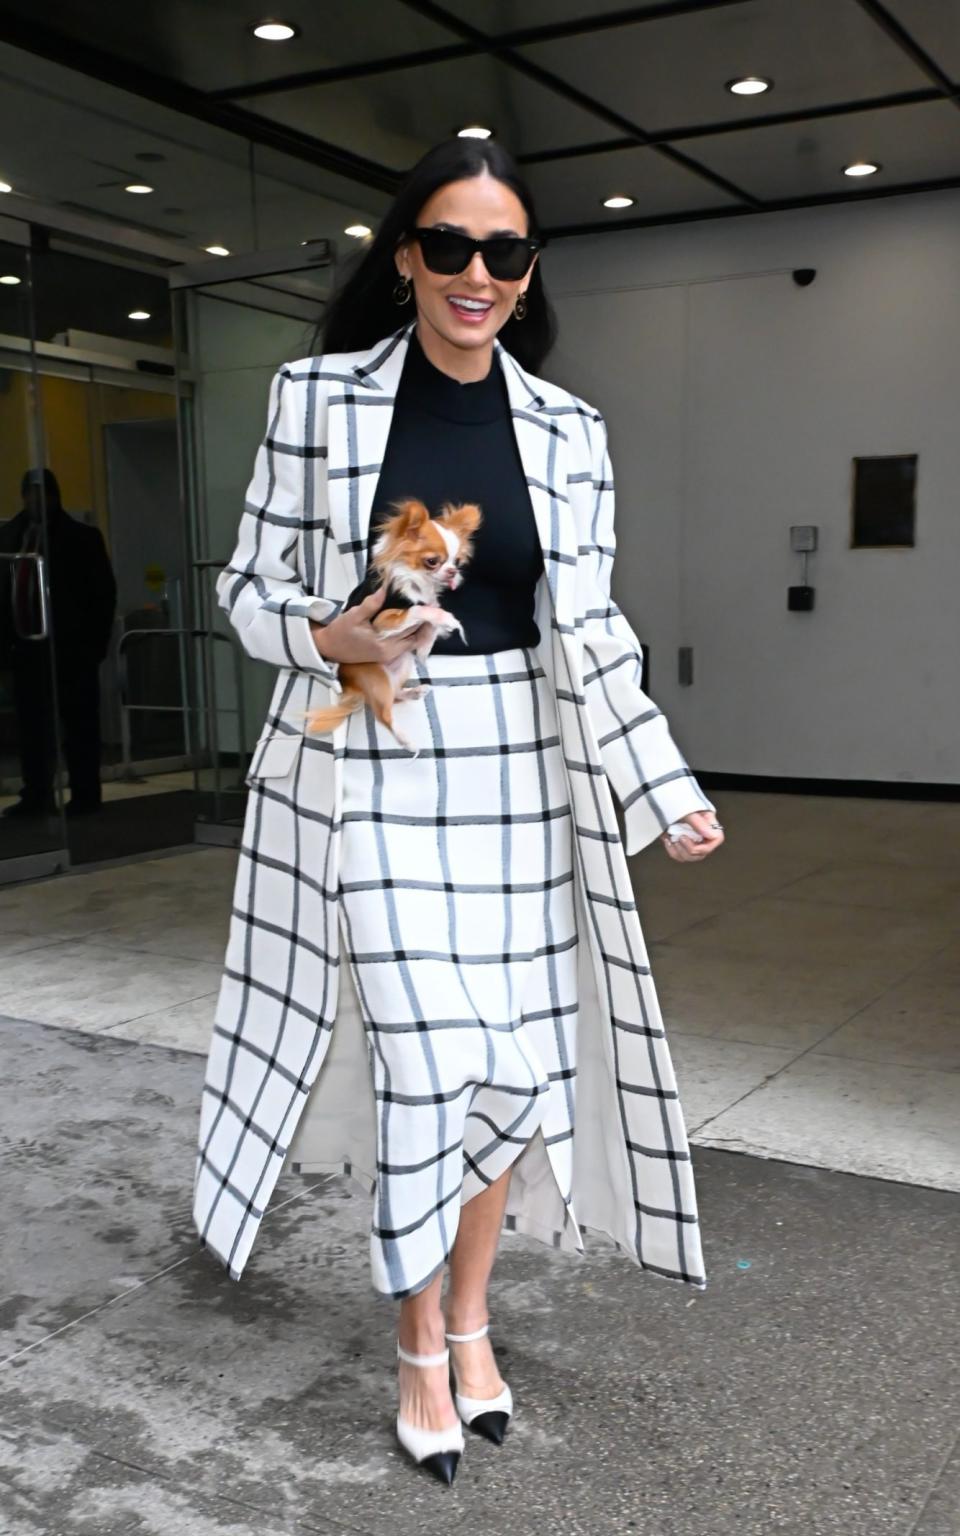 Few looks for Moore are complete without her favorite accessory: her chihuahua Pilaf